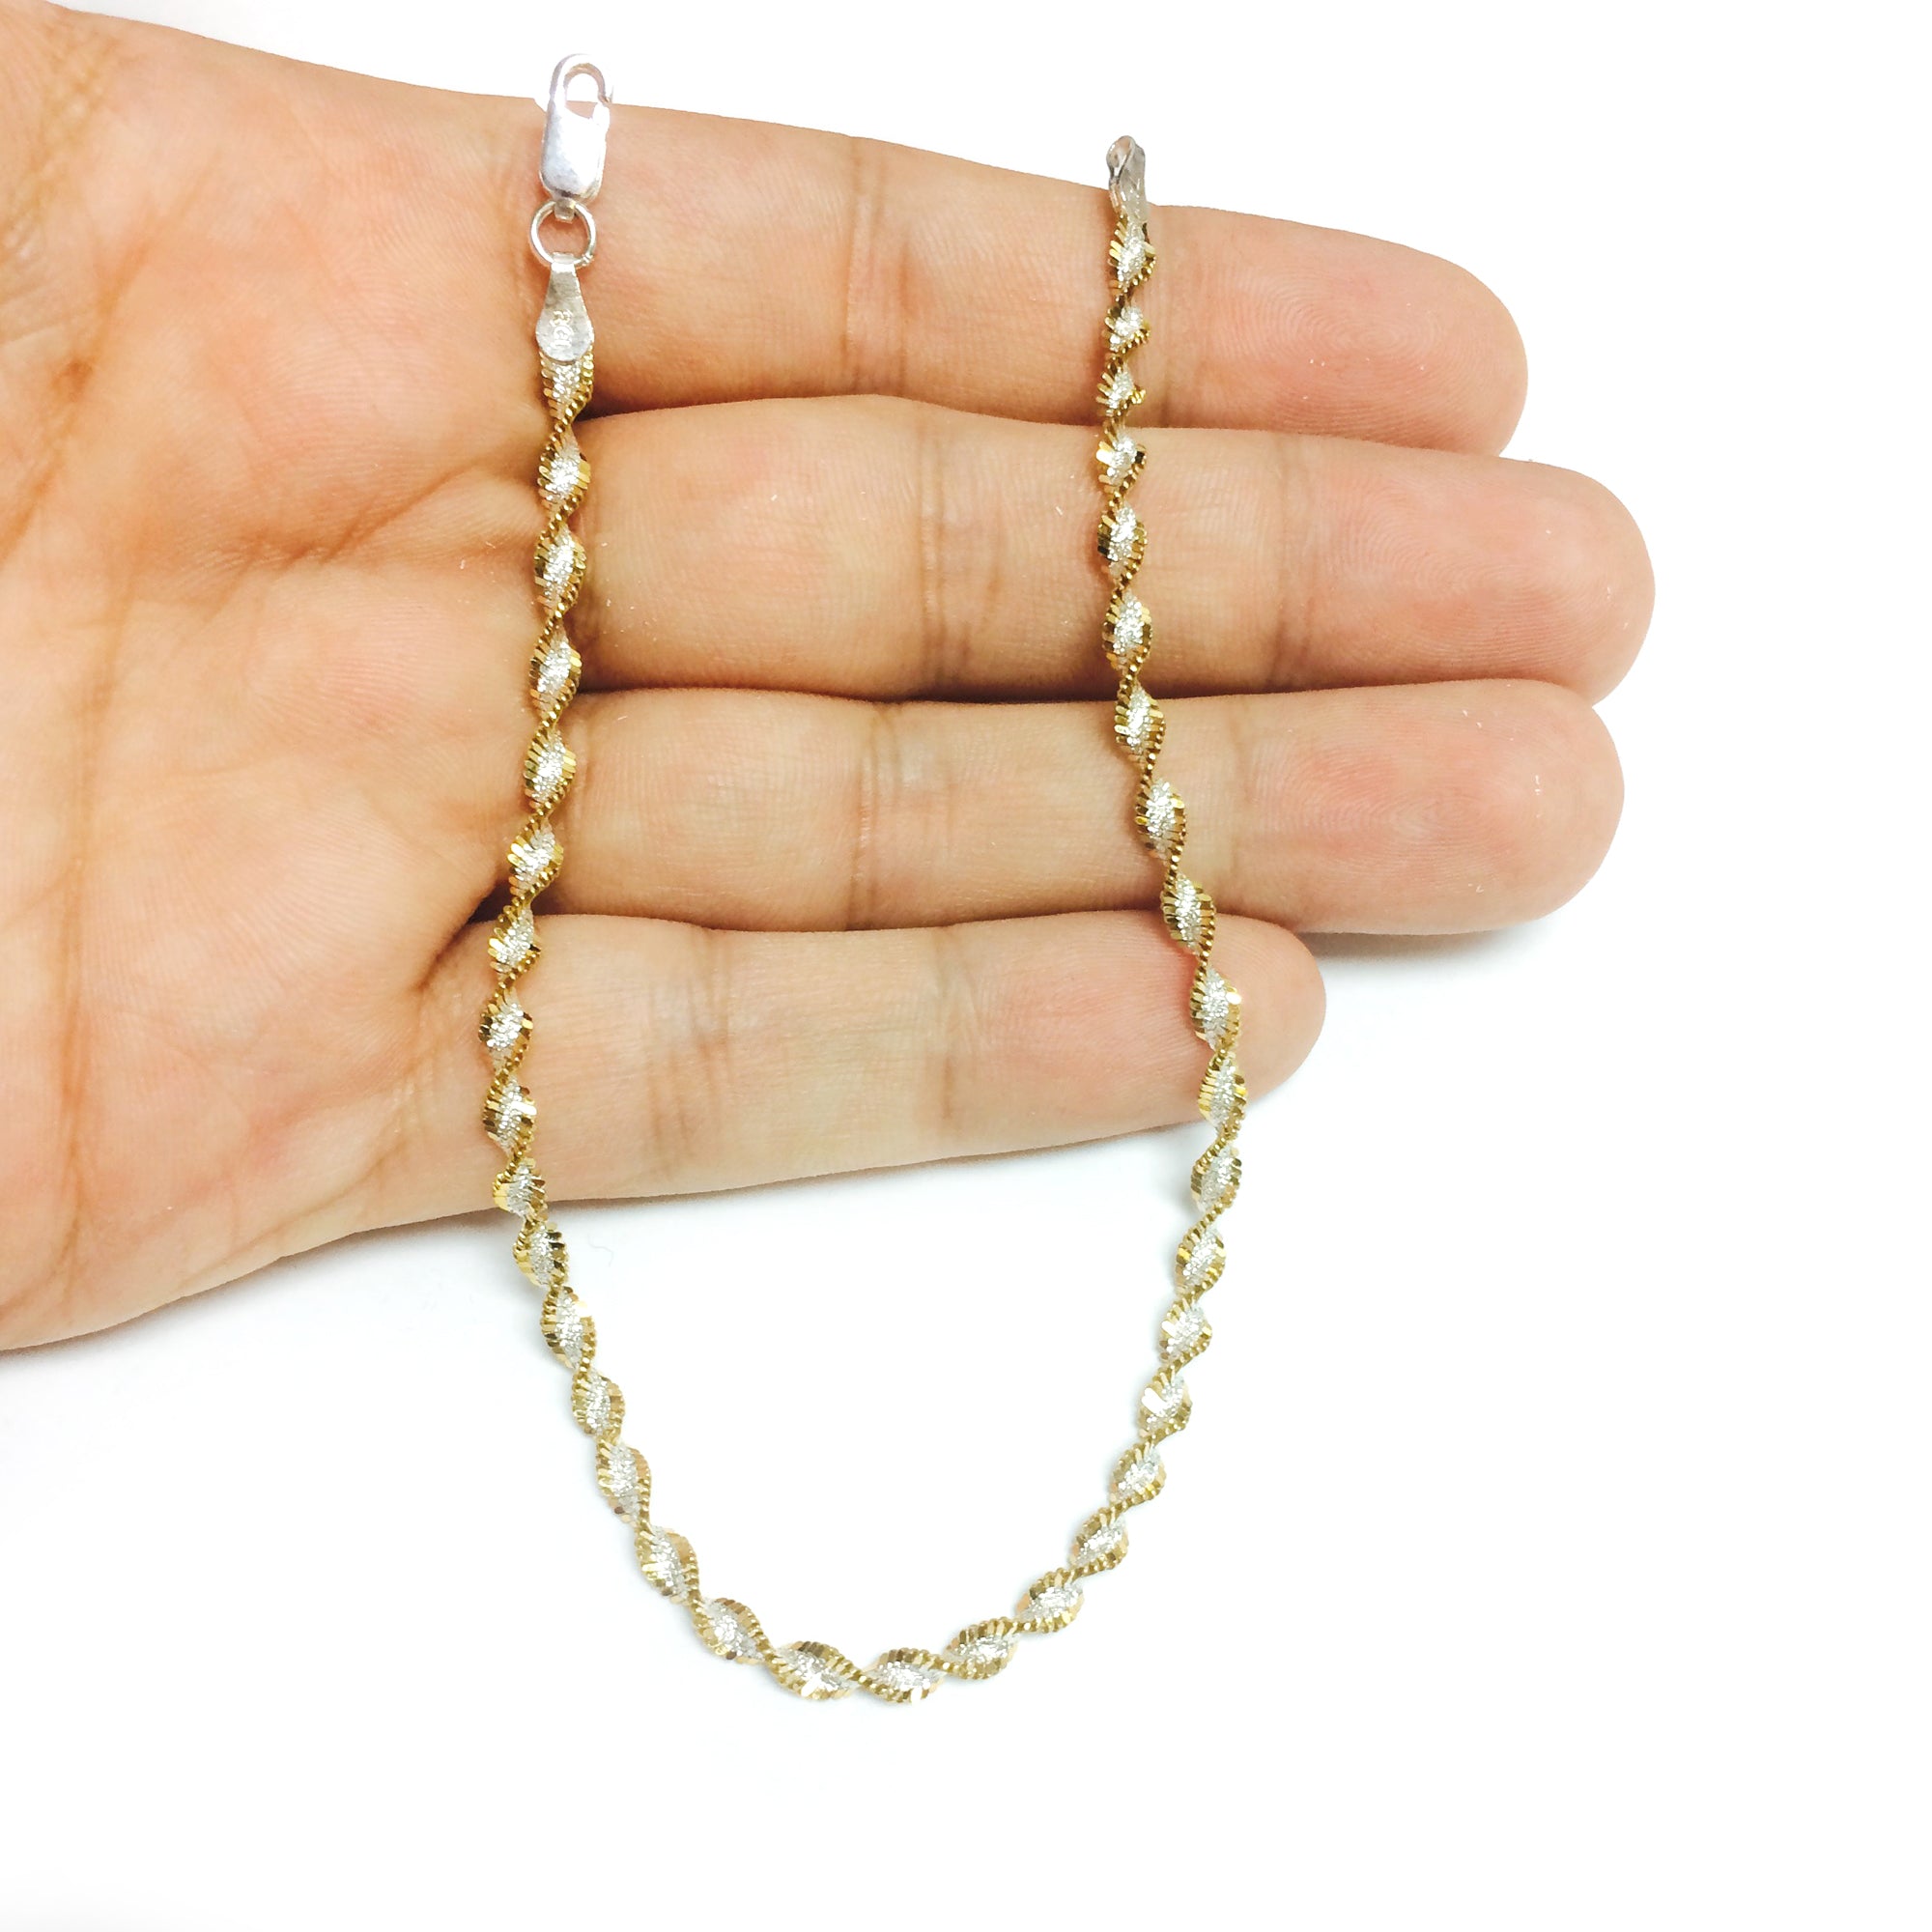 White And Yellow Singapore Style Chain Anklet In Sterling Silver